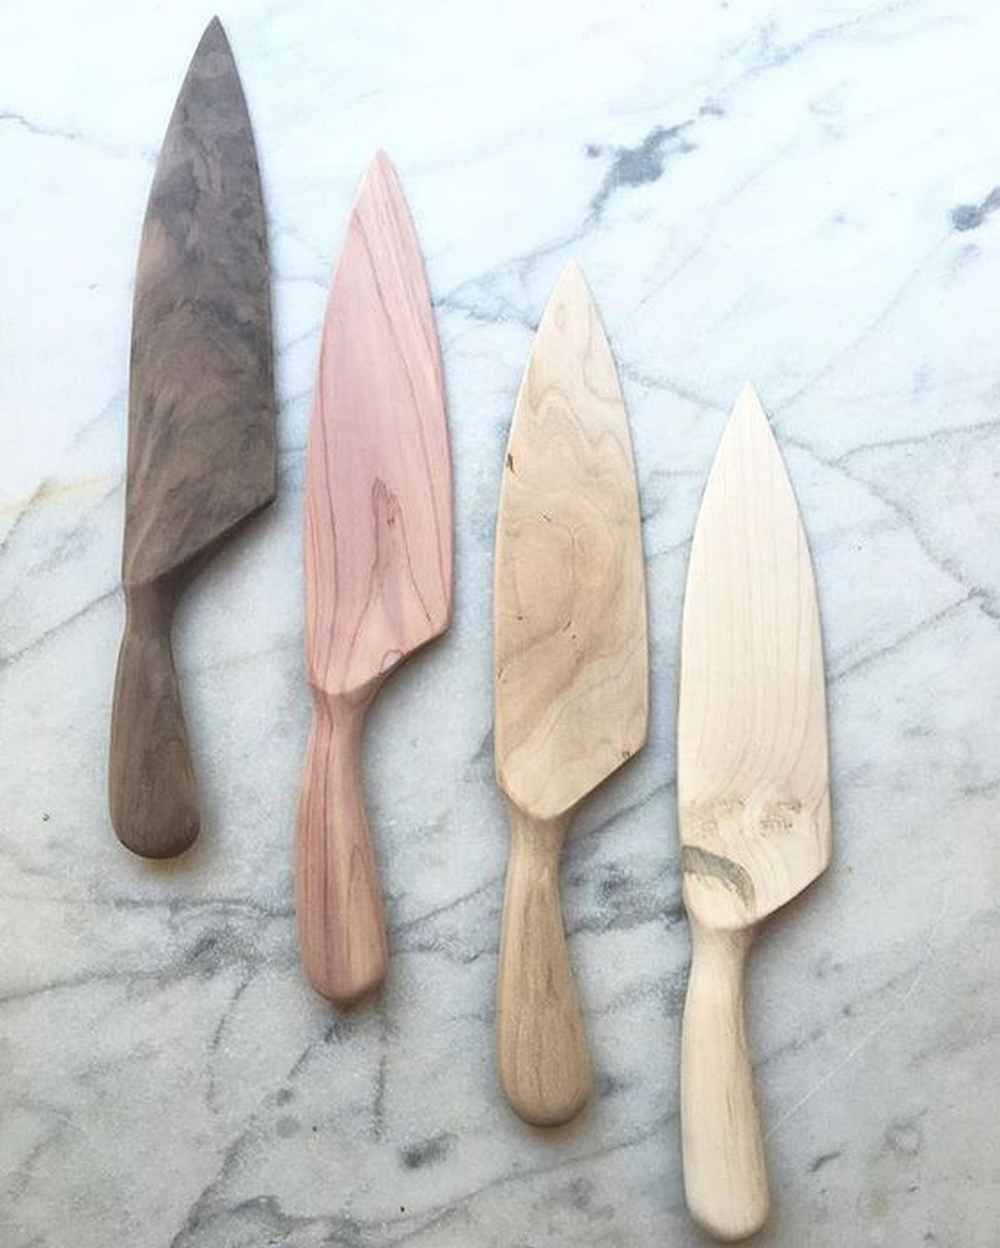 How to Make a Wooden Cake Knife - DIY projects for everyone!